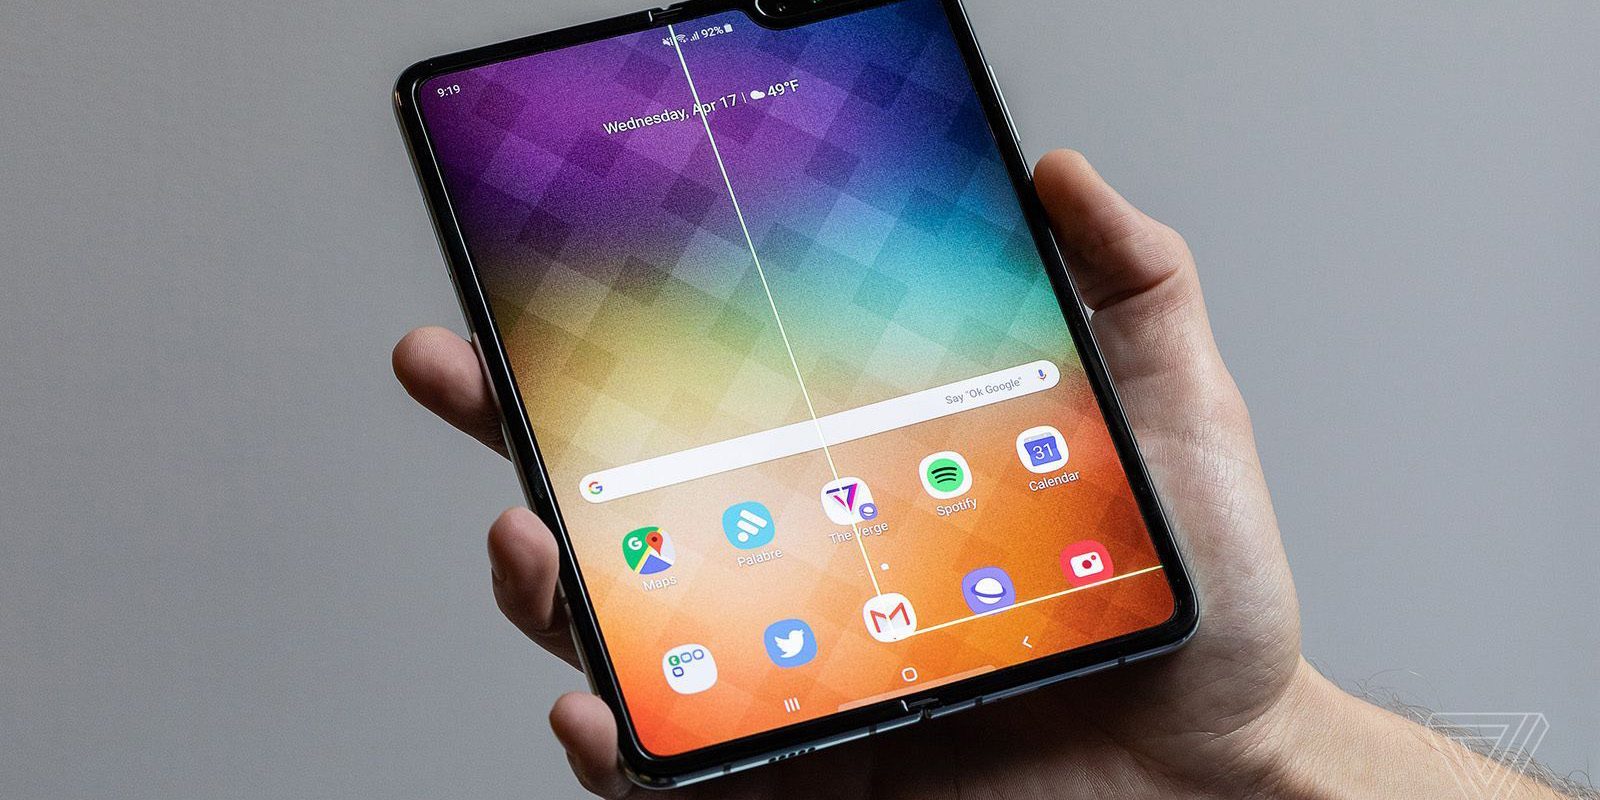 Samsung is set start pre-orders for Galaxy Fold in South Korea on September 11